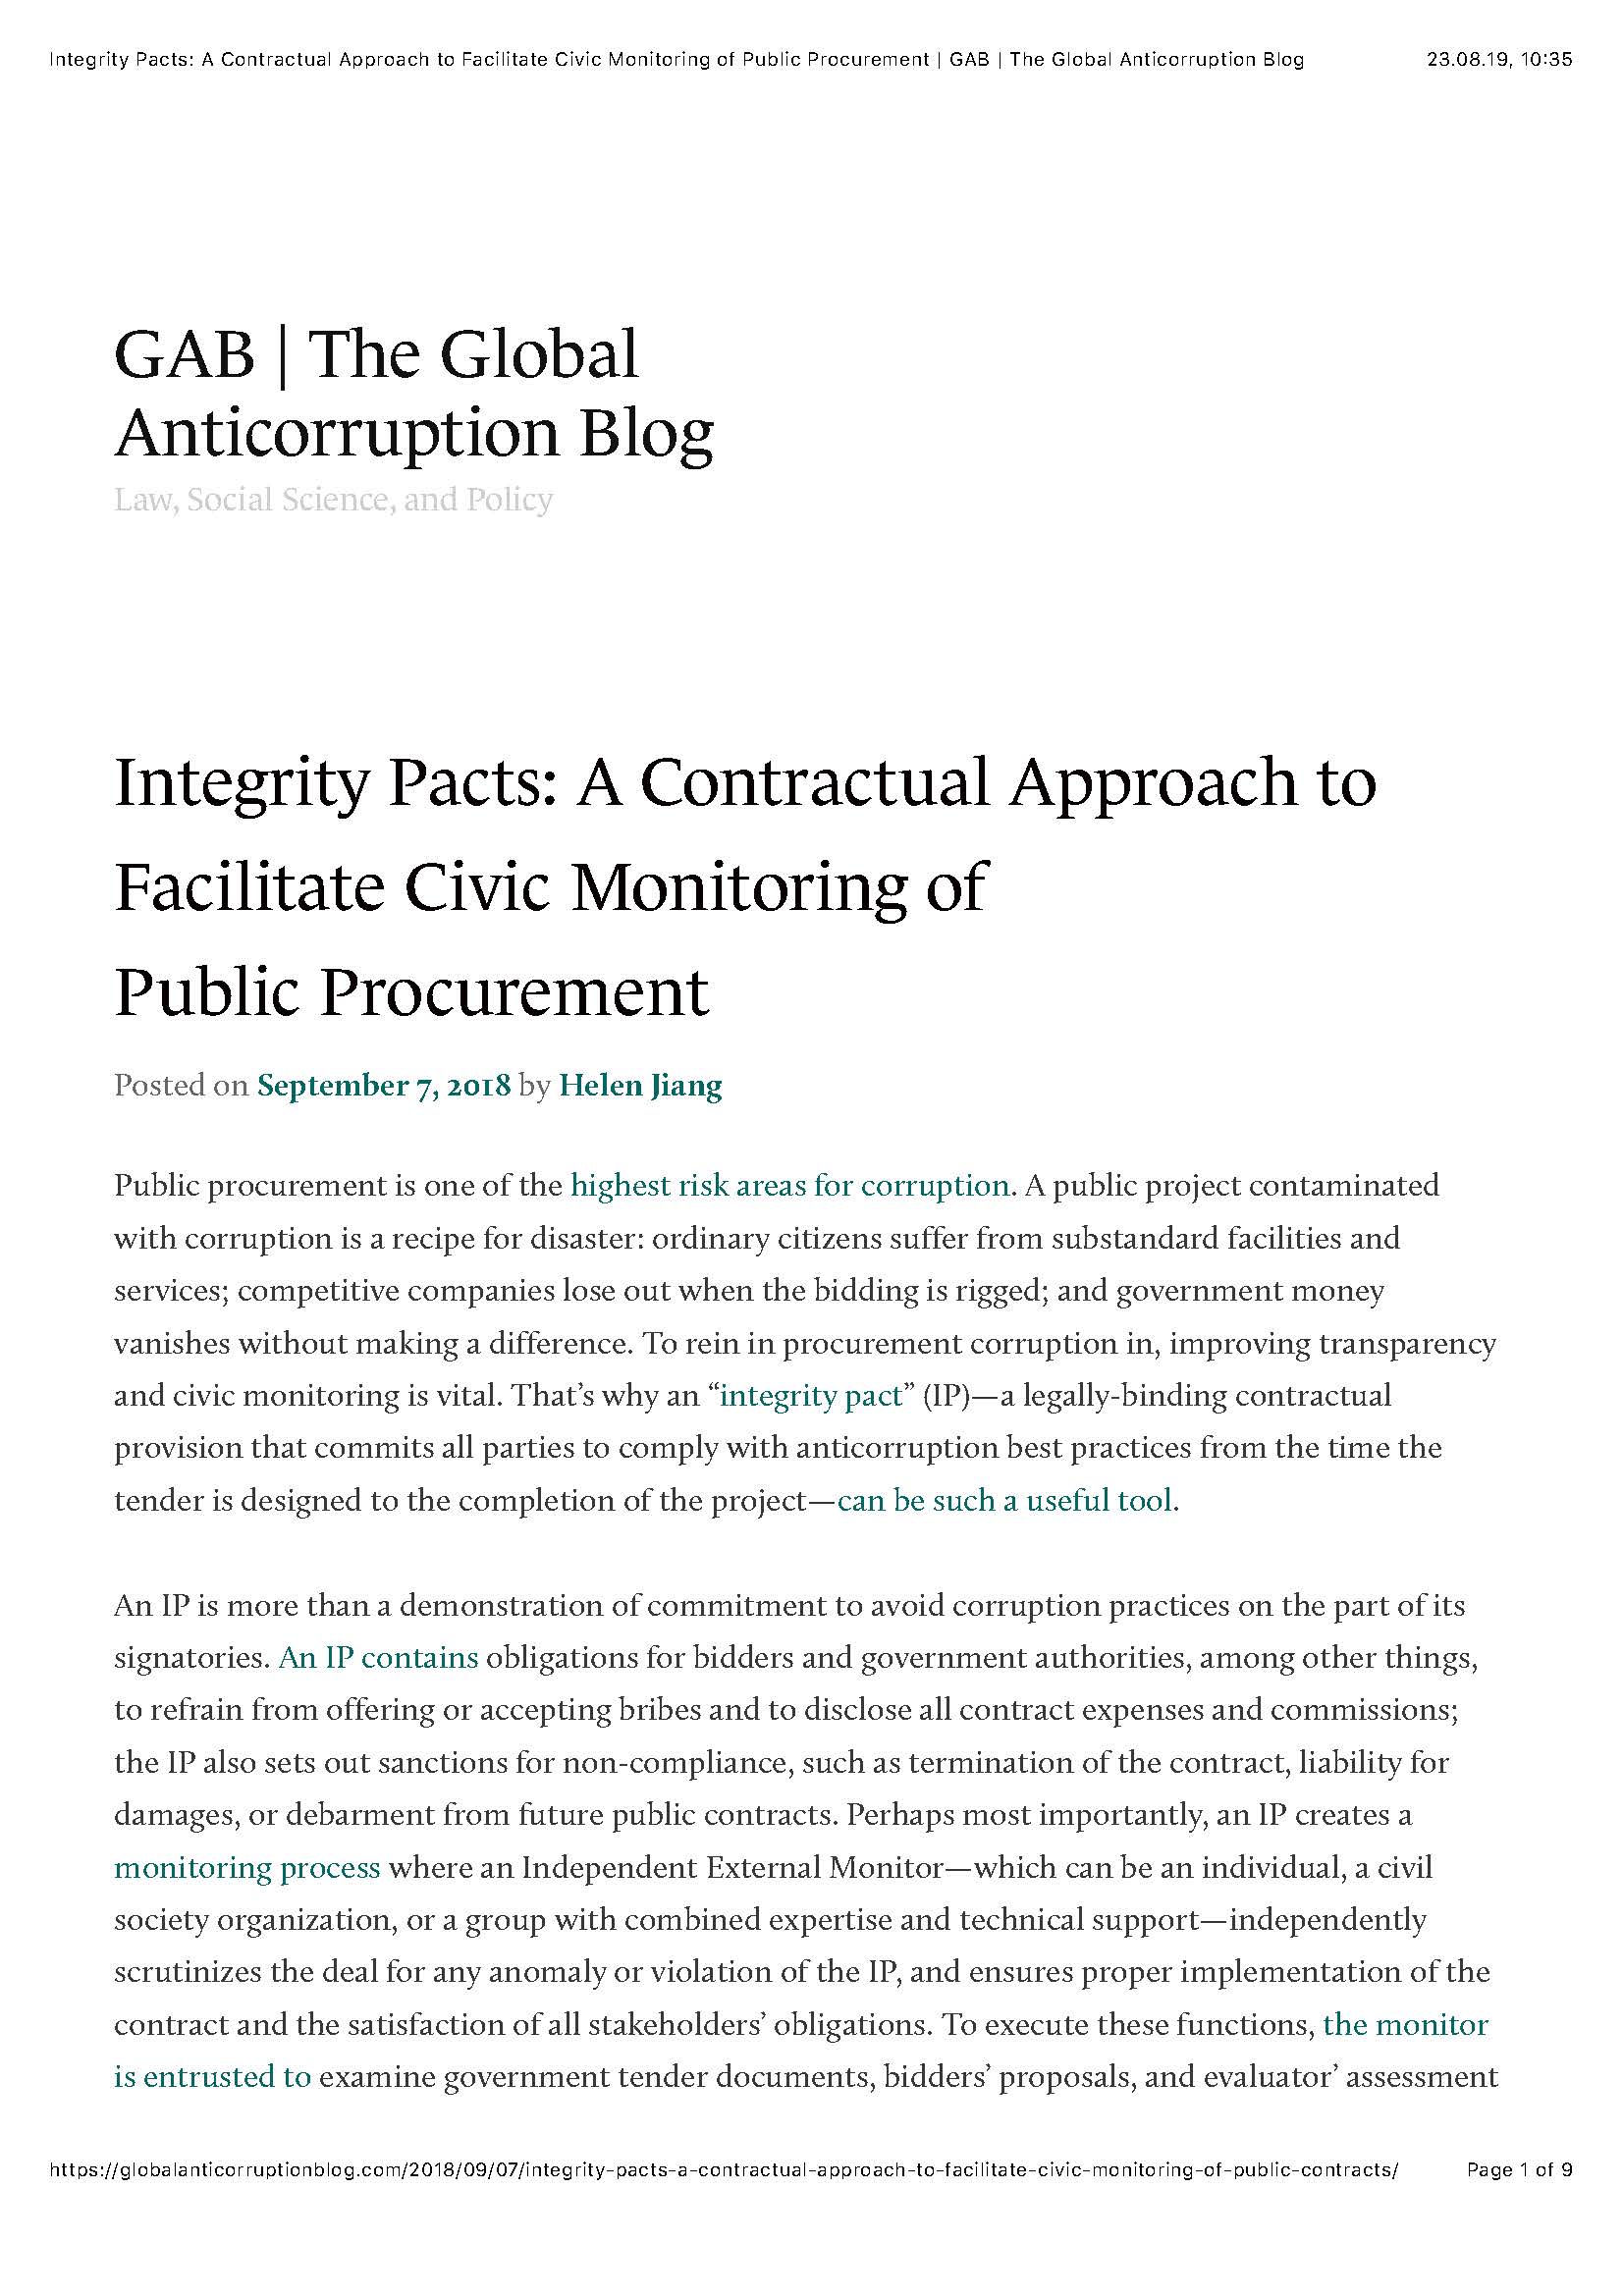 Pages from GAB_Integrity Pacts A Contractual Approach to Facilitate Civic Monitoring of Public Procurement_2018.jpg